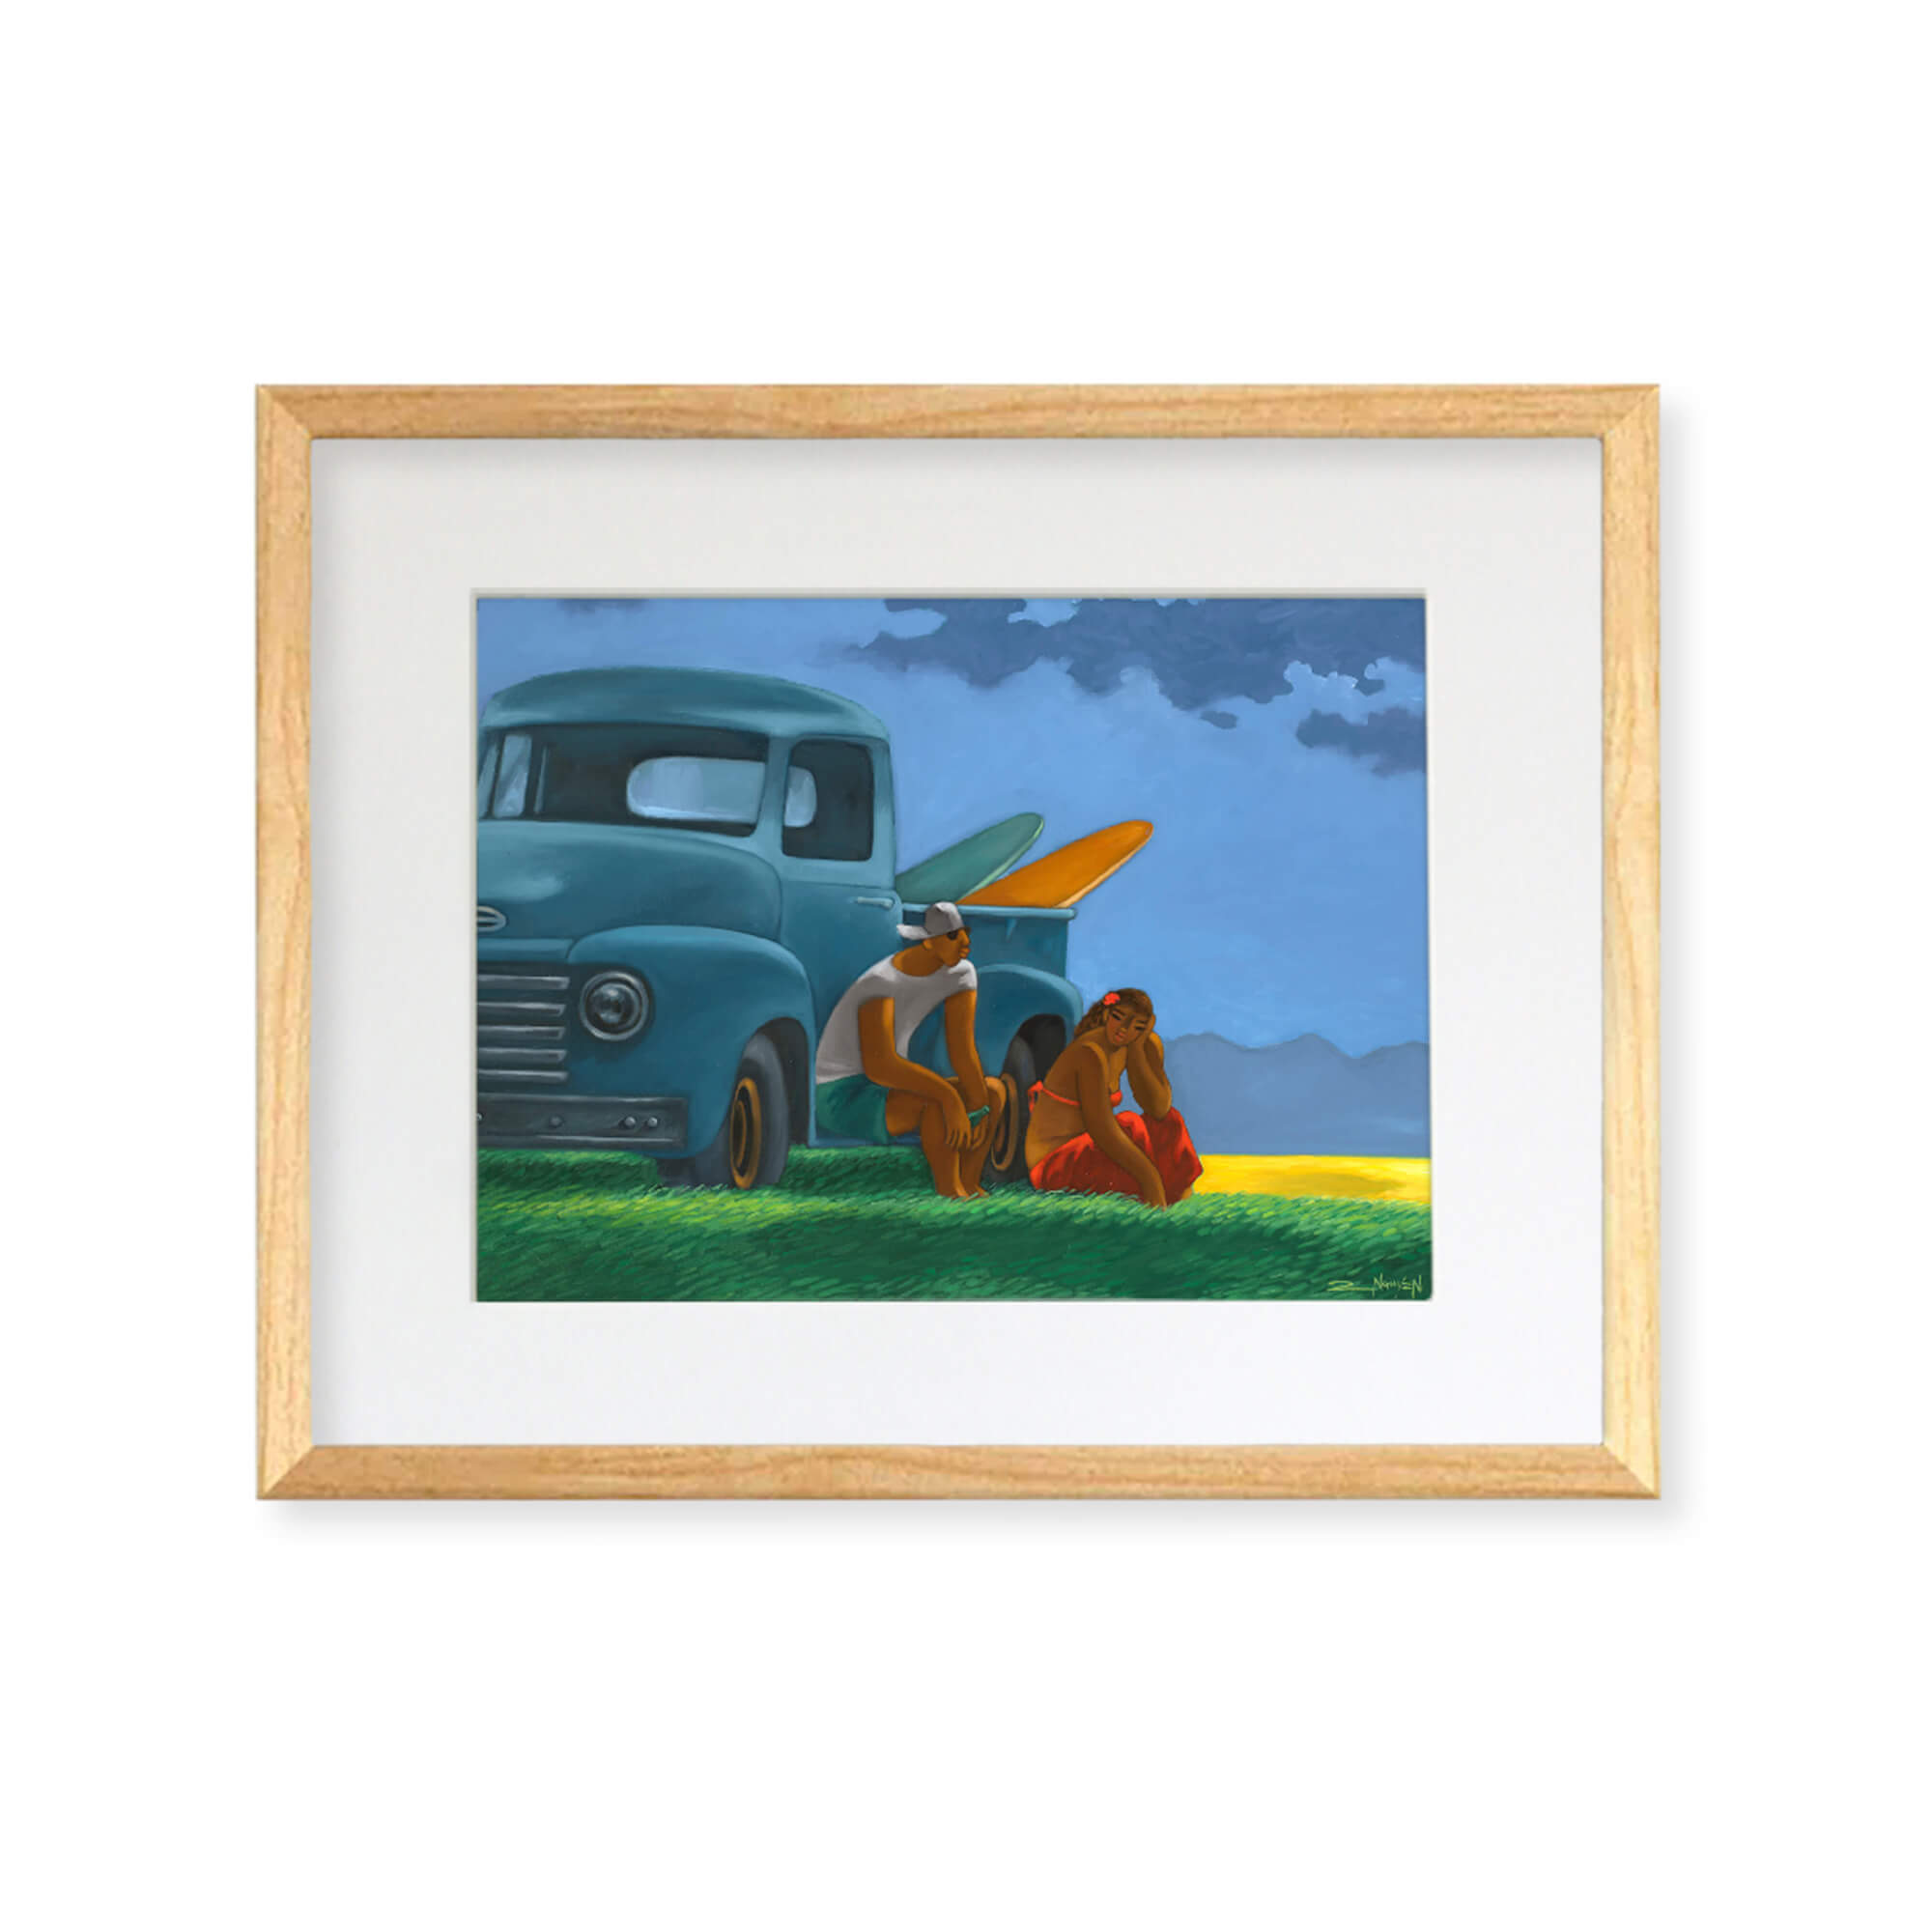 Framed matted art print of sitting on the green field by their vintage Chevrolet truck by Hawaii artist Tim Nguyen